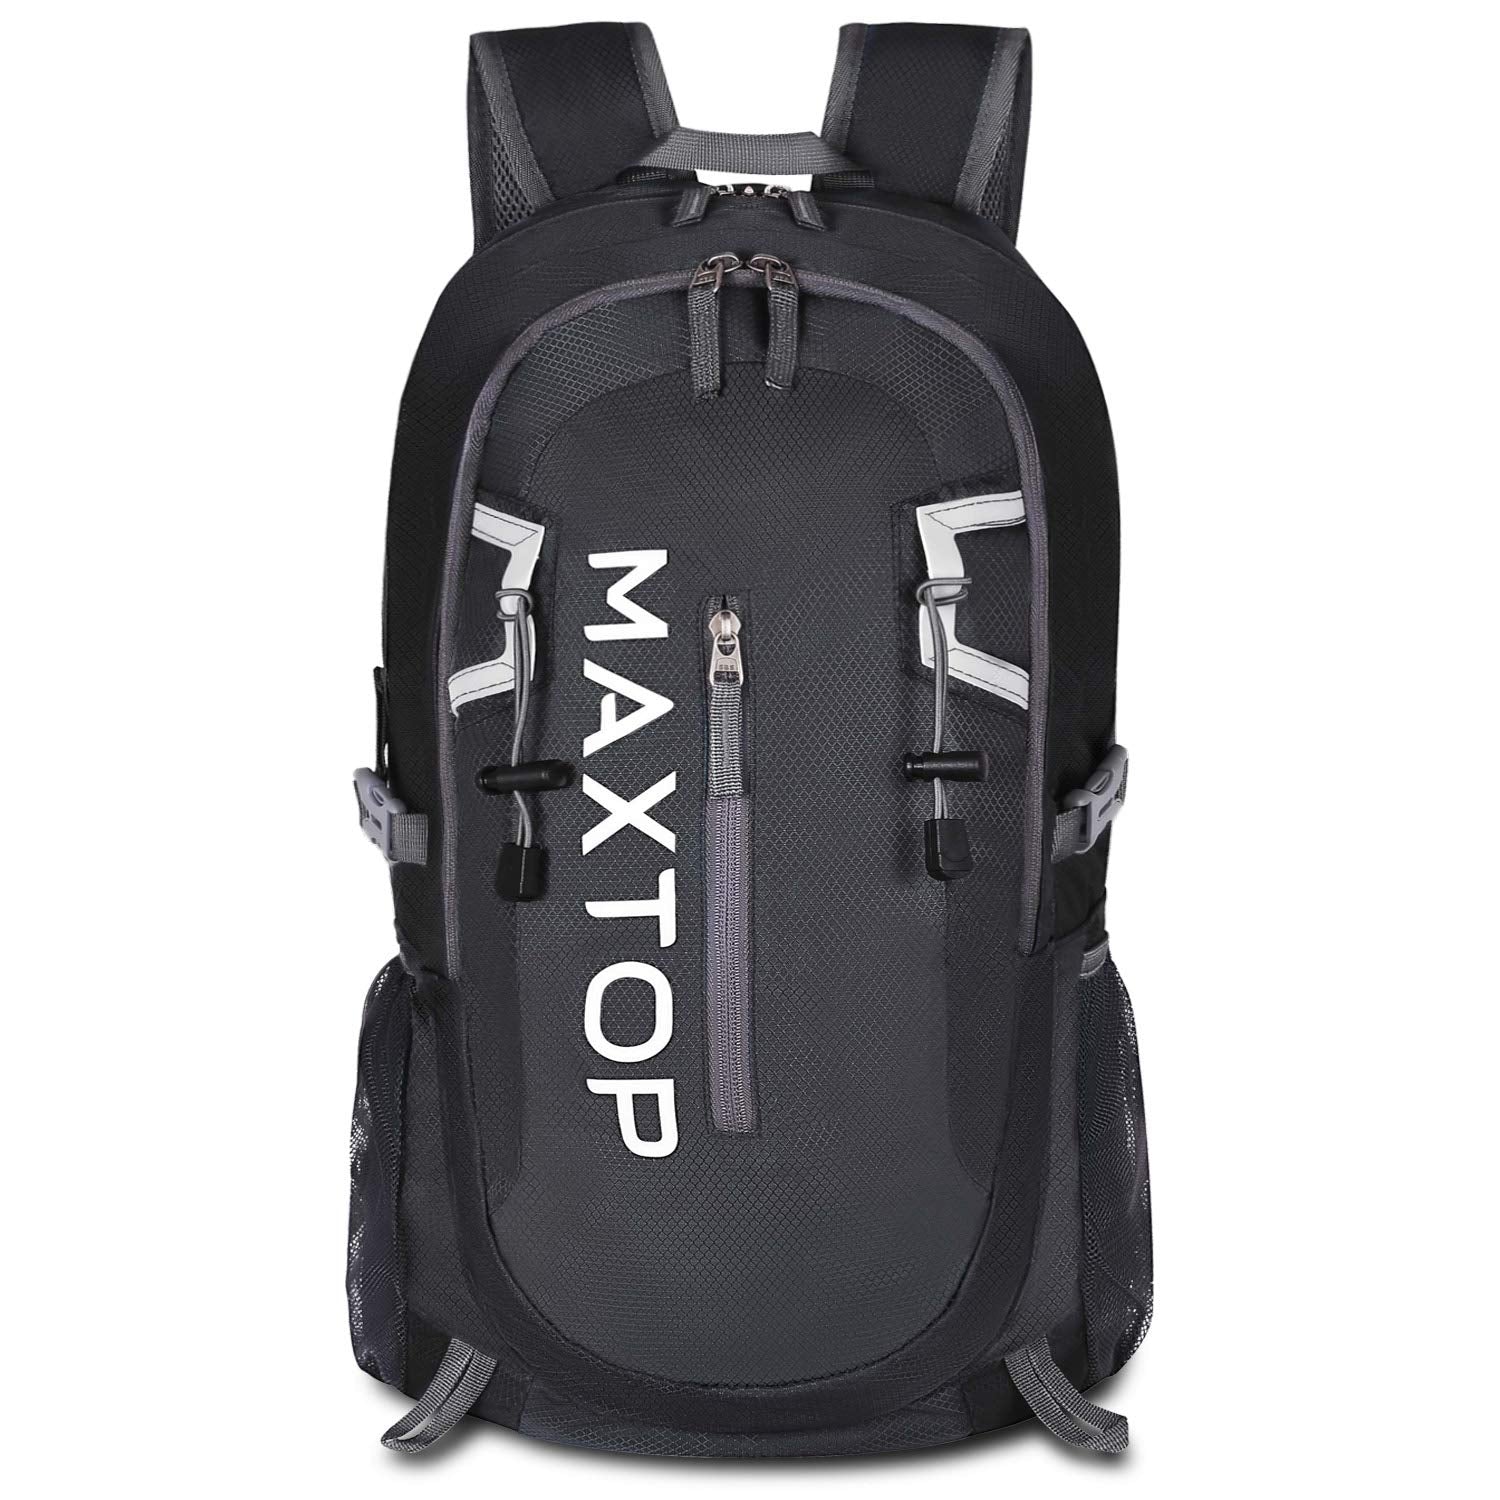 MXTPRO? Packable Lightweight 40L Outdoor Hiking Backpack | Water Resistant Foldable